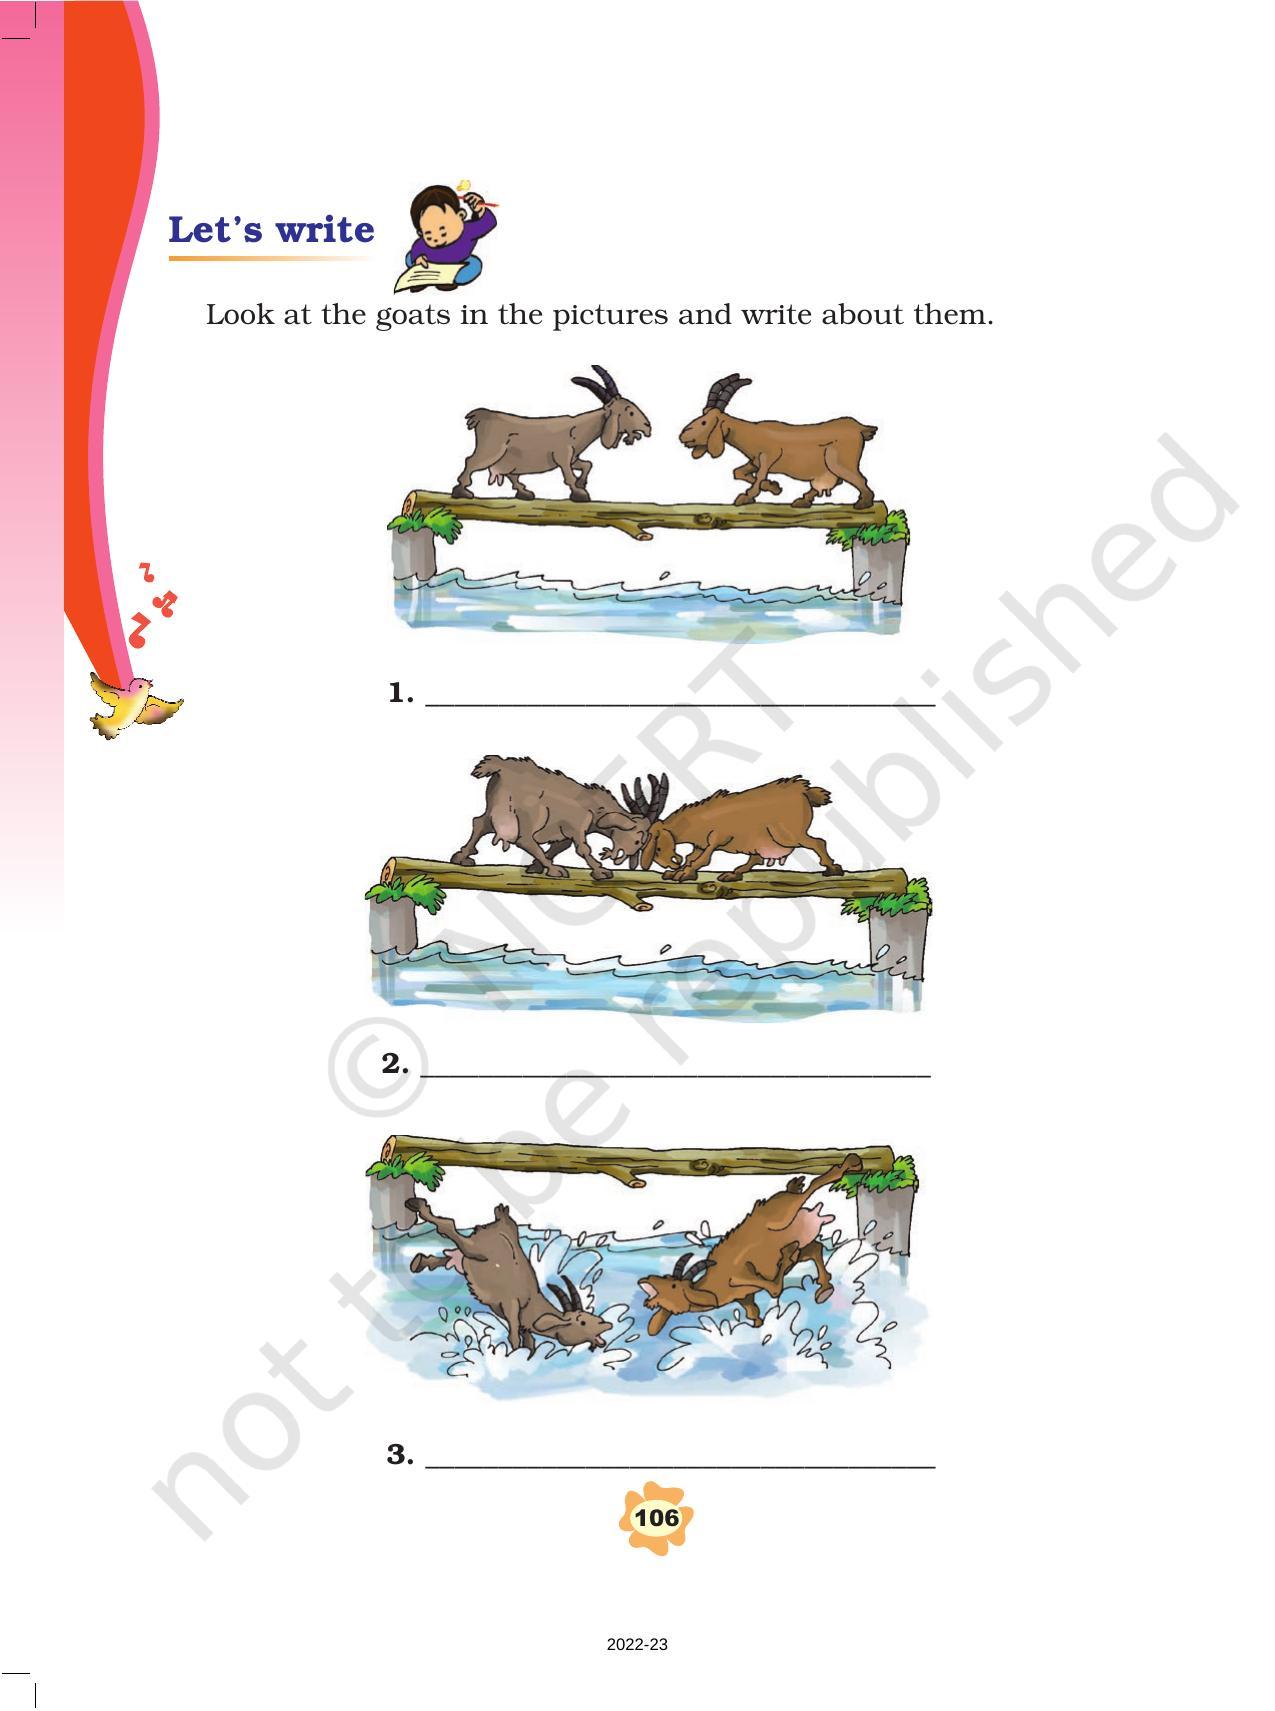 NCERT Book for Class 3 English: Unit X.1-How Creatures Move - Page 10